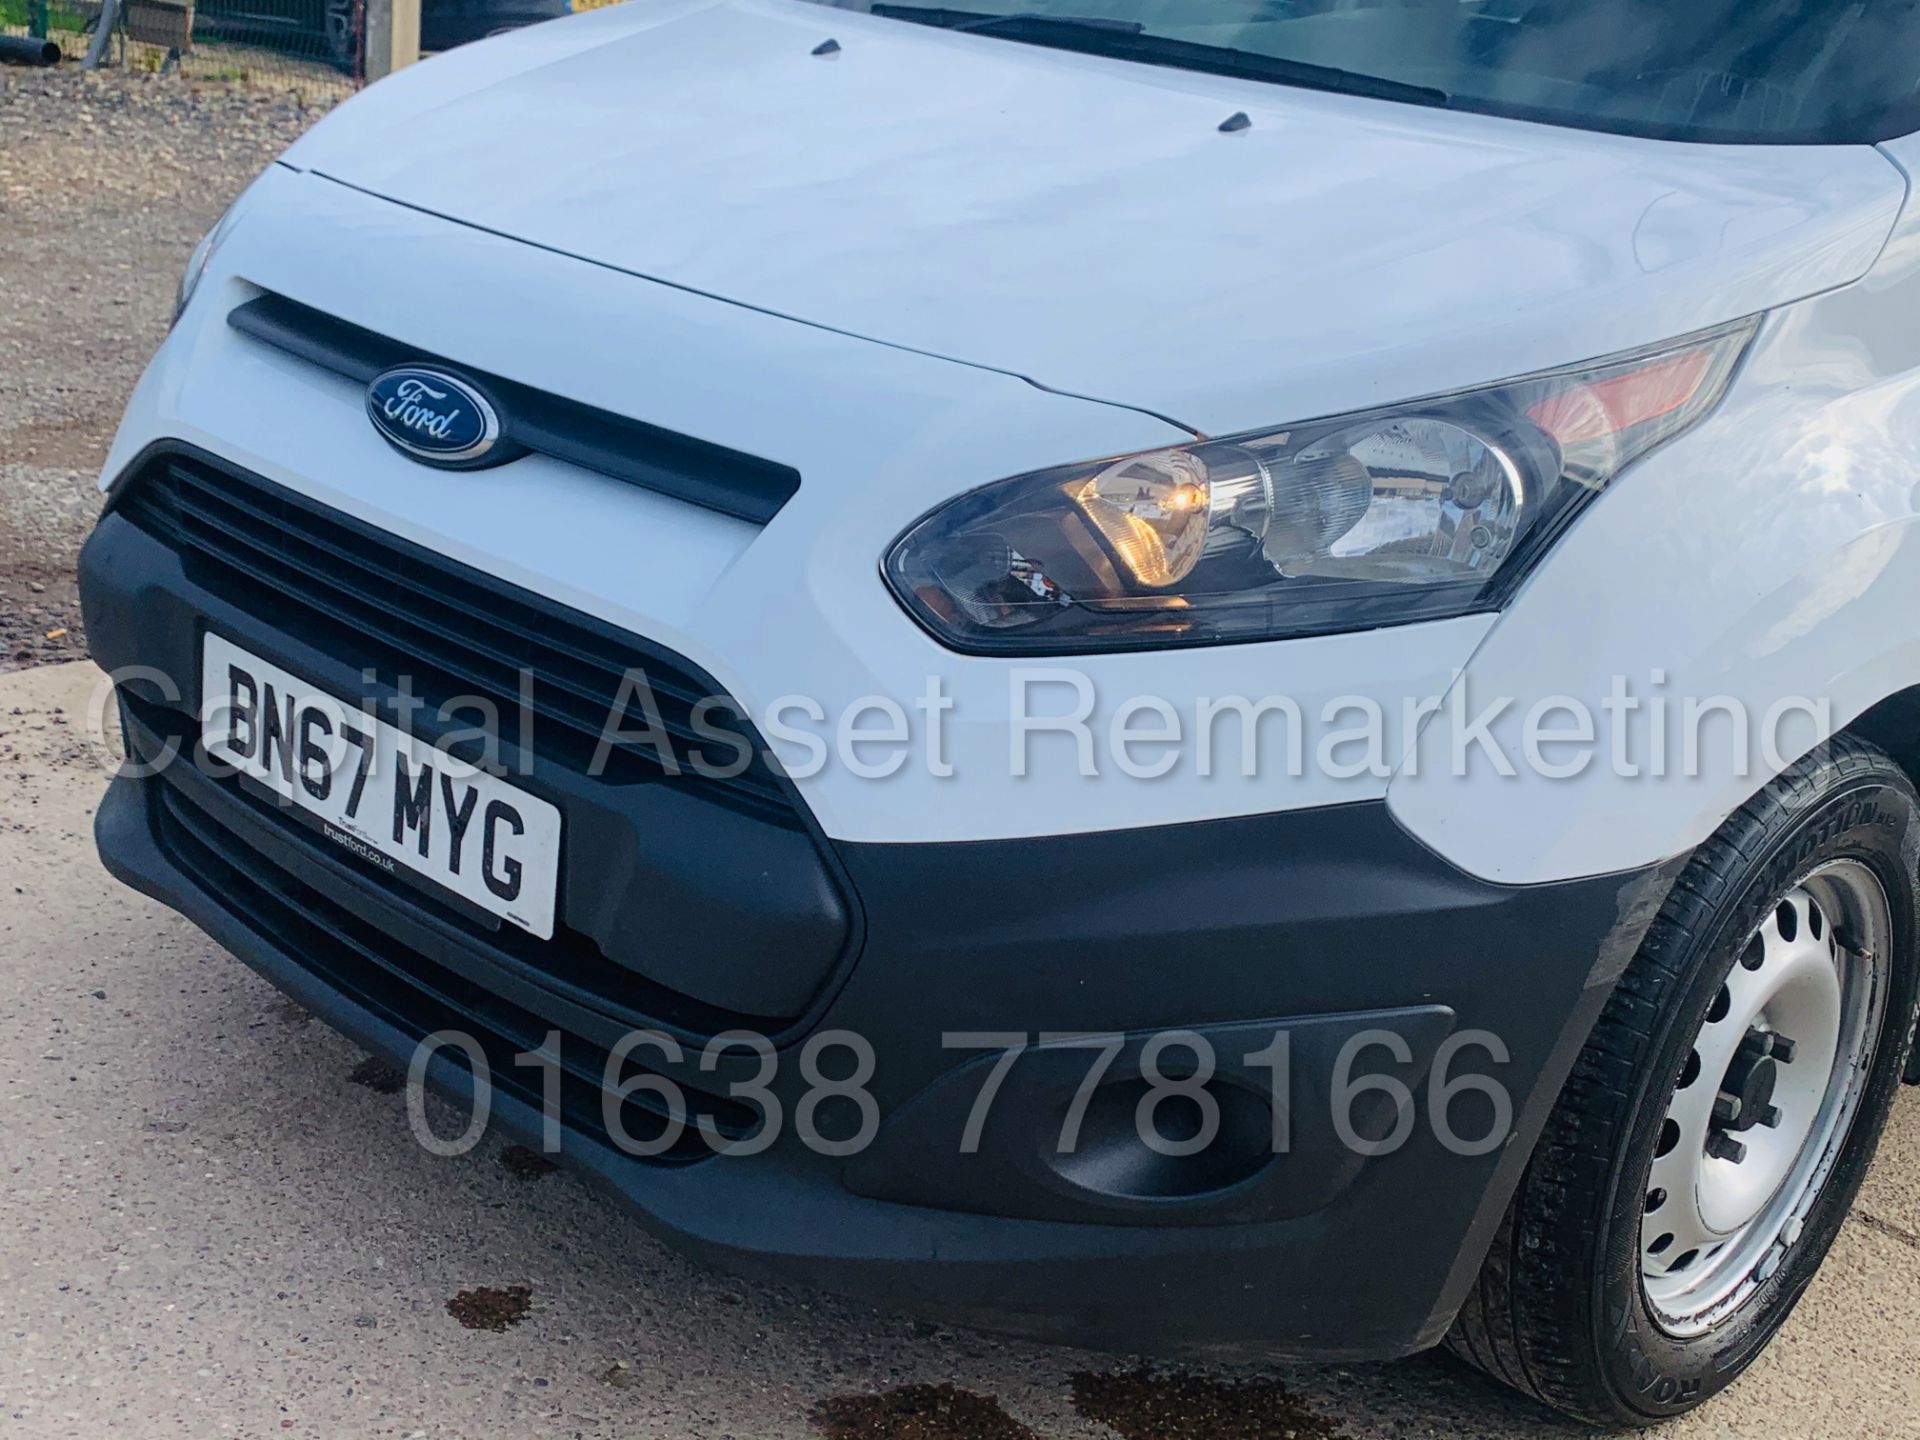 (On Sale) FORD TRANSIT CONNECT *LWB - 5 SEATER CREW VAN* (67 REG - EURO 6) 1.5 TDCI *A/C* (1 OWNER) - Image 16 of 40